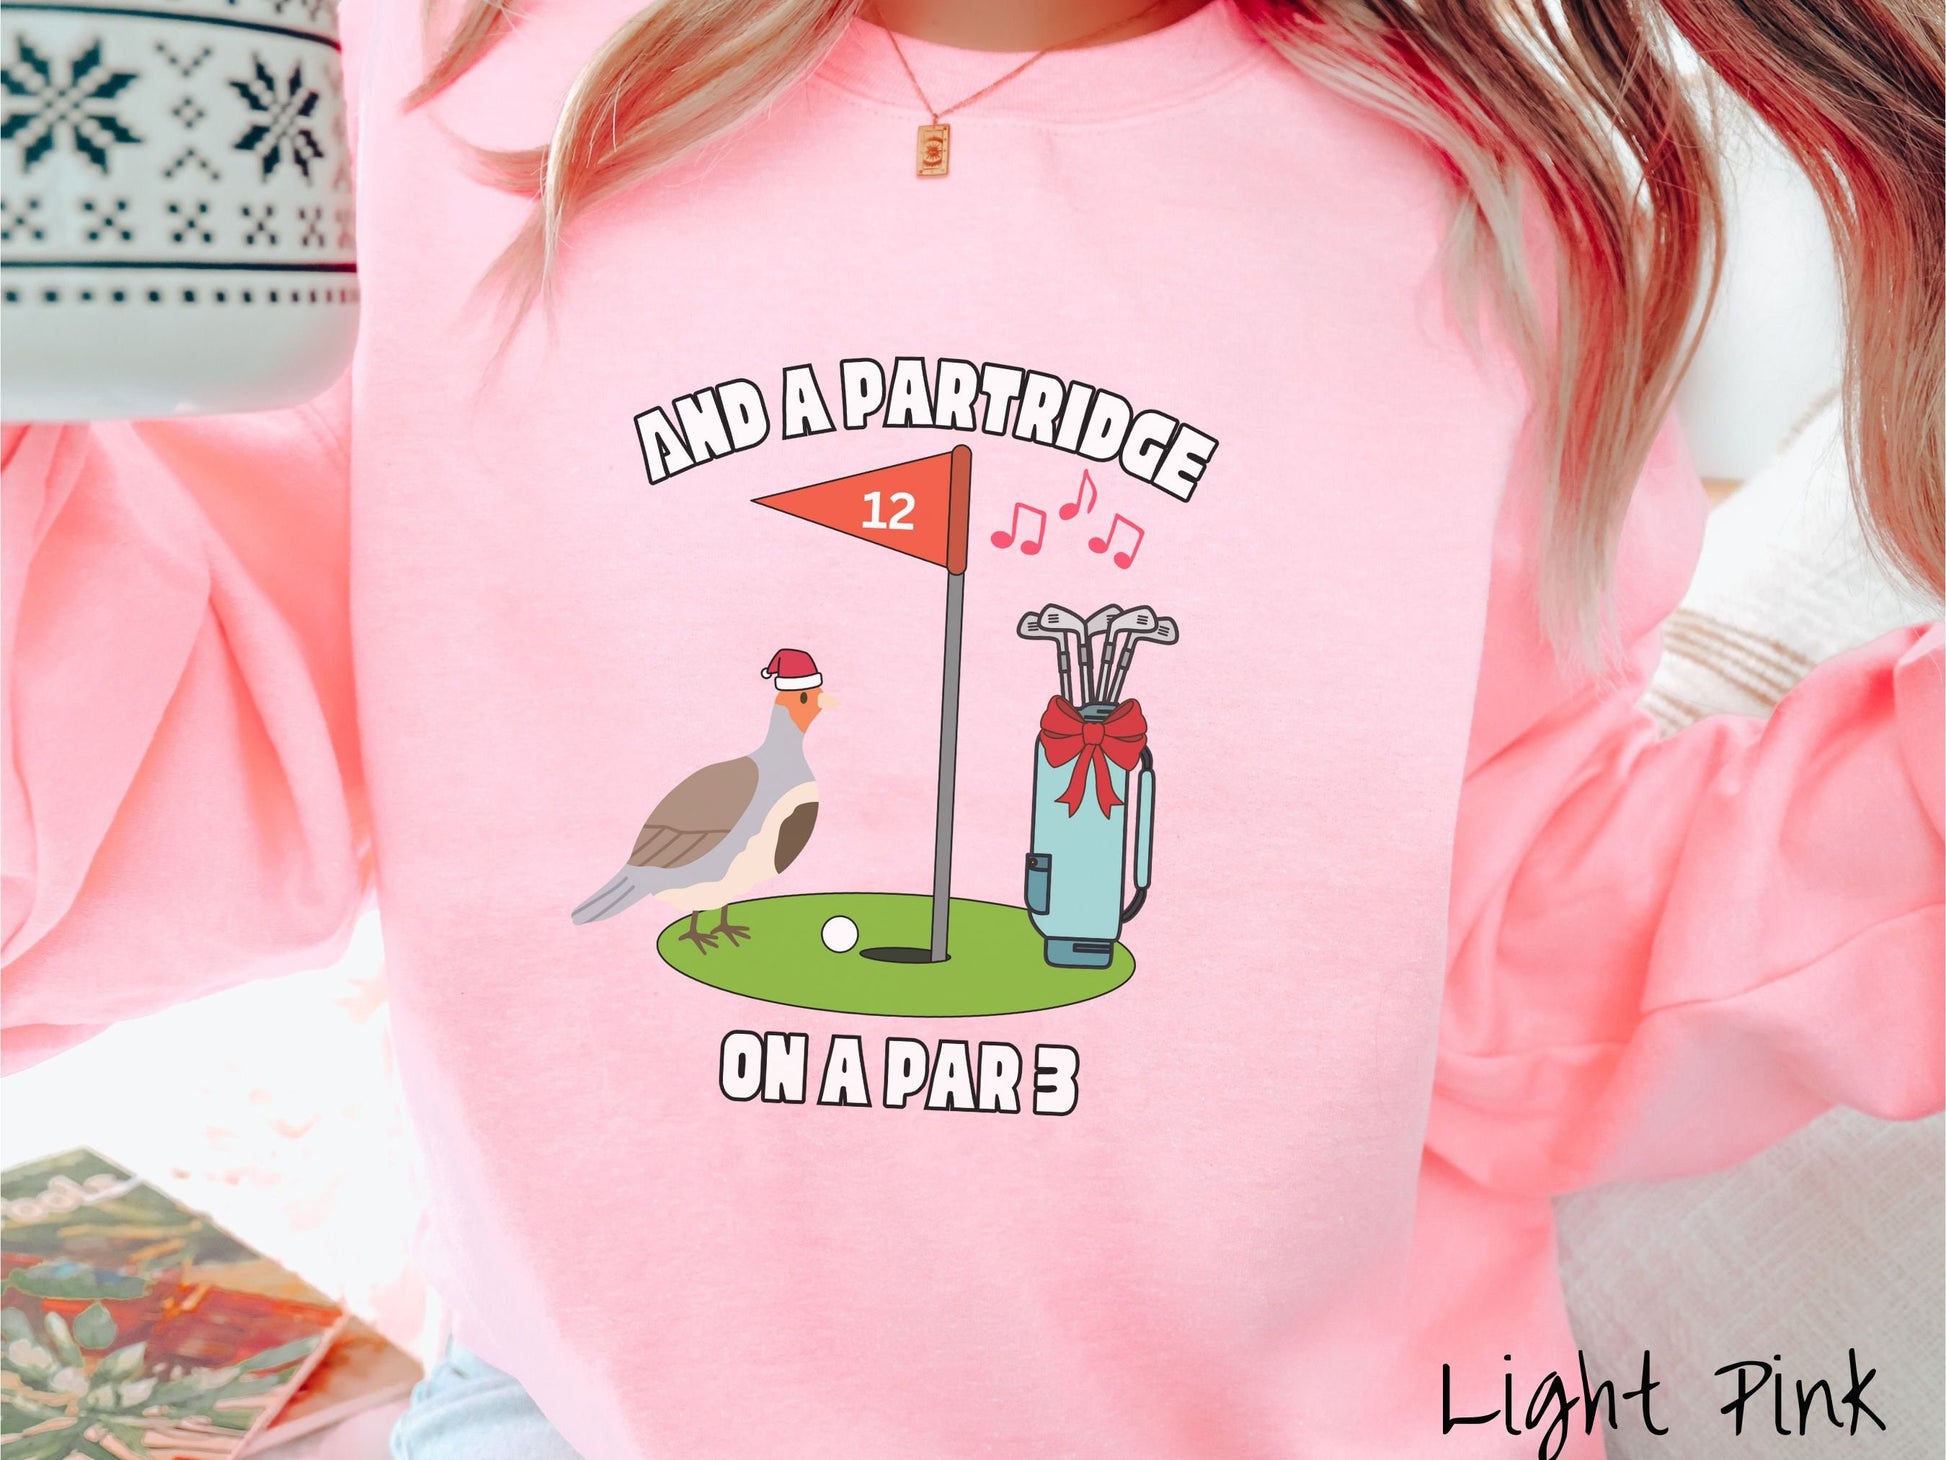 A woman wearing a cute light pink colored sweatshirt with a partridge bird on a golf green next to a hole with a flag in it with #12 on it. There is also a set of golf clubs with a red bow and music playing in the air.